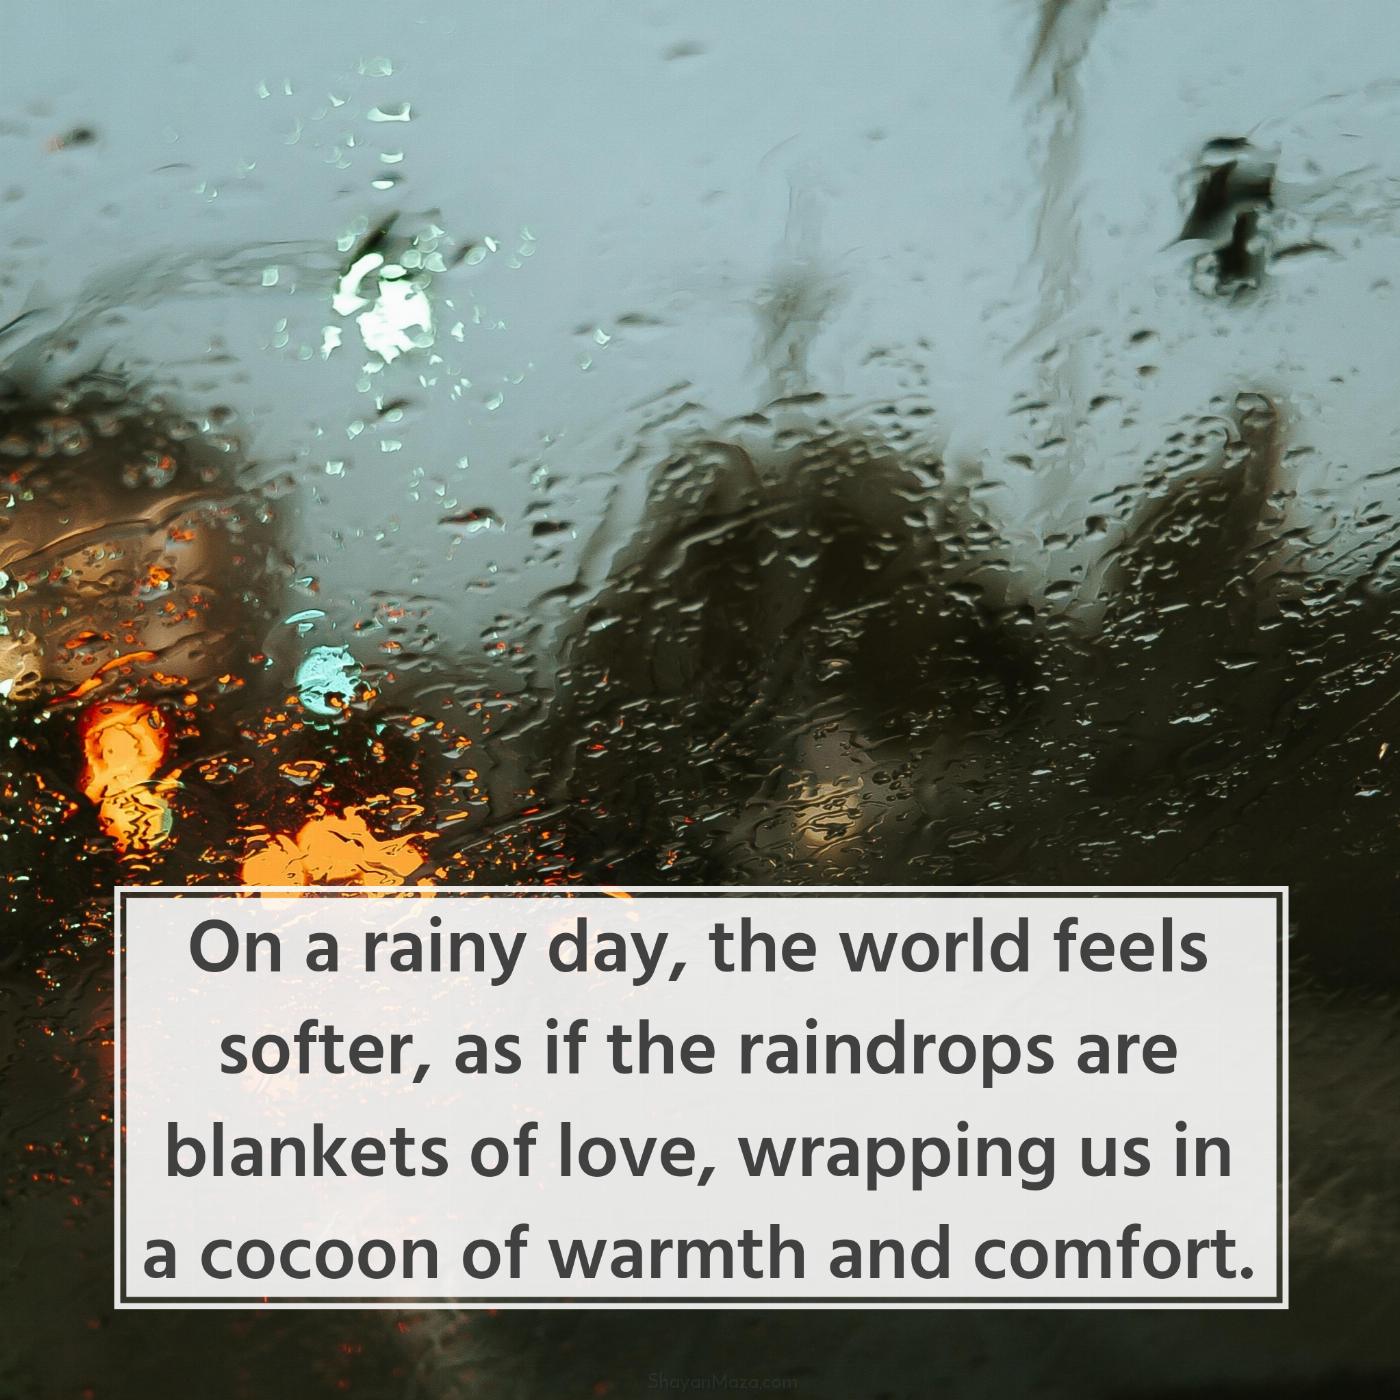 On a rainy day the world feels softer as if the raindrops are blankets of love